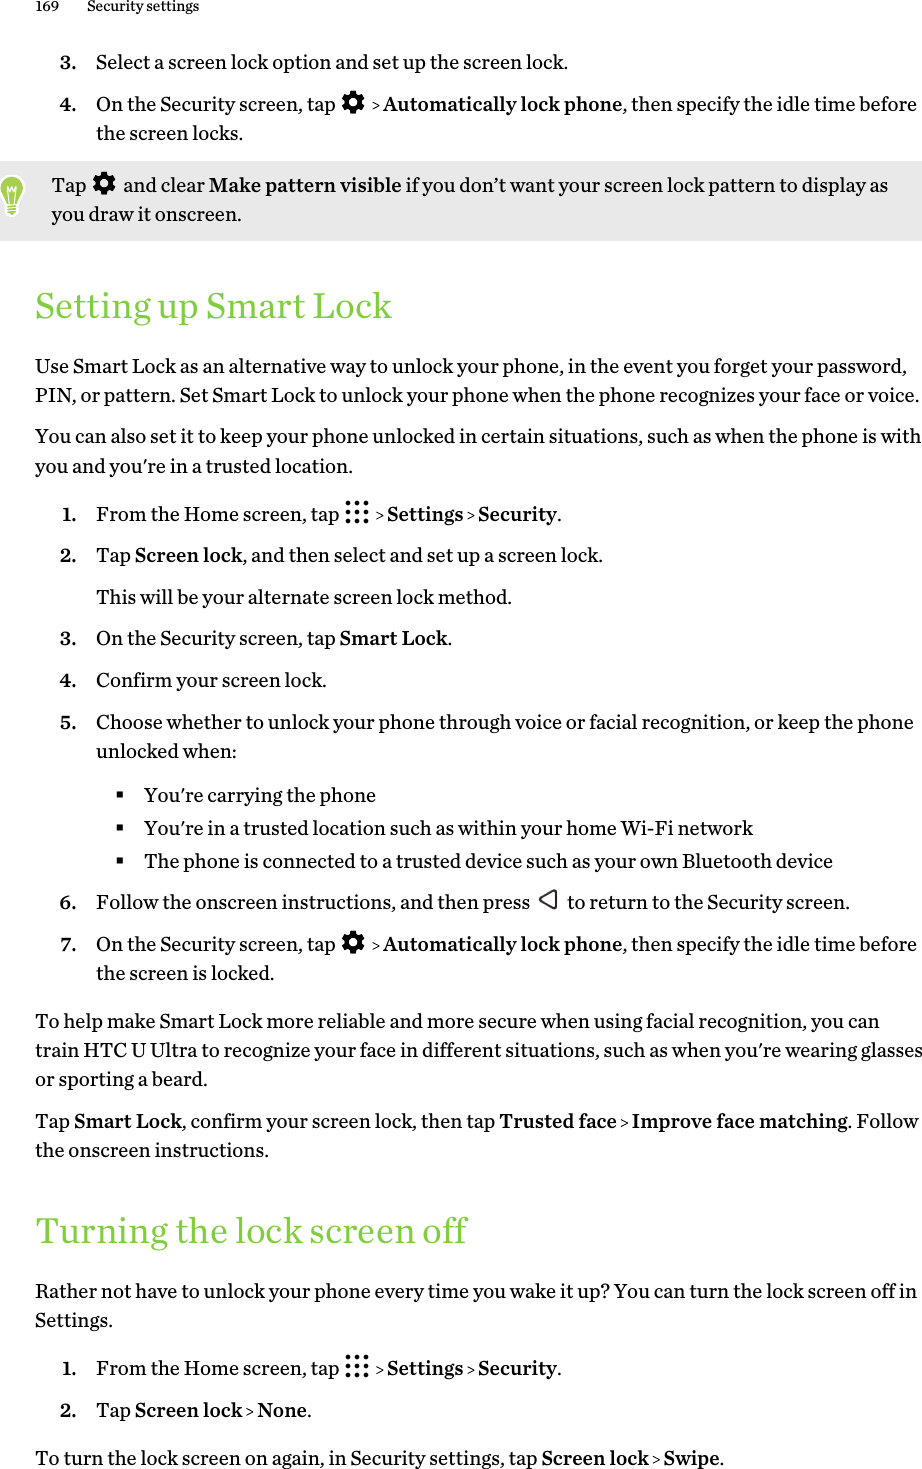 3. Select a screen lock option and set up the screen lock.4. On the Security screen, tap     Automatically lock phone, then specify the idle time beforethe screen locks. Tap   and clear Make pattern visible if you don’t want your screen lock pattern to display asyou draw it onscreen.Setting up Smart LockUse Smart Lock as an alternative way to unlock your phone, in the event you forget your password,PIN, or pattern. Set Smart Lock to unlock your phone when the phone recognizes your face or voice.You can also set it to keep your phone unlocked in certain situations, such as when the phone is withyou and you&apos;re in a trusted location.1. From the Home screen, tap     Settings   Security.2. Tap Screen lock, and then select and set up a screen lock. This will be your alternate screen lock method.3. On the Security screen, tap Smart Lock.4. Confirm your screen lock.5. Choose whether to unlock your phone through voice or facial recognition, or keep the phoneunlocked when:§You&apos;re carrying the phone§You&apos;re in a trusted location such as within your home Wi-Fi network§The phone is connected to a trusted device such as your own Bluetooth device6. Follow the onscreen instructions, and then press   to return to the Security screen.7. On the Security screen, tap     Automatically lock phone, then specify the idle time beforethe screen is locked.To help make Smart Lock more reliable and more secure when using facial recognition, you cantrain HTC U Ultra to recognize your face in different situations, such as when you&apos;re wearing glassesor sporting a beard.Tap Smart Lock, confirm your screen lock, then tap Trusted face   Improve face matching. Followthe onscreen instructions.Turning the lock screen offRather not have to unlock your phone every time you wake it up? You can turn the lock screen off inSettings.1. From the Home screen, tap     Settings   Security.2. Tap Screen lock   None.To turn the lock screen on again, in Security settings, tap Screen lock   Swipe.169 Security settings